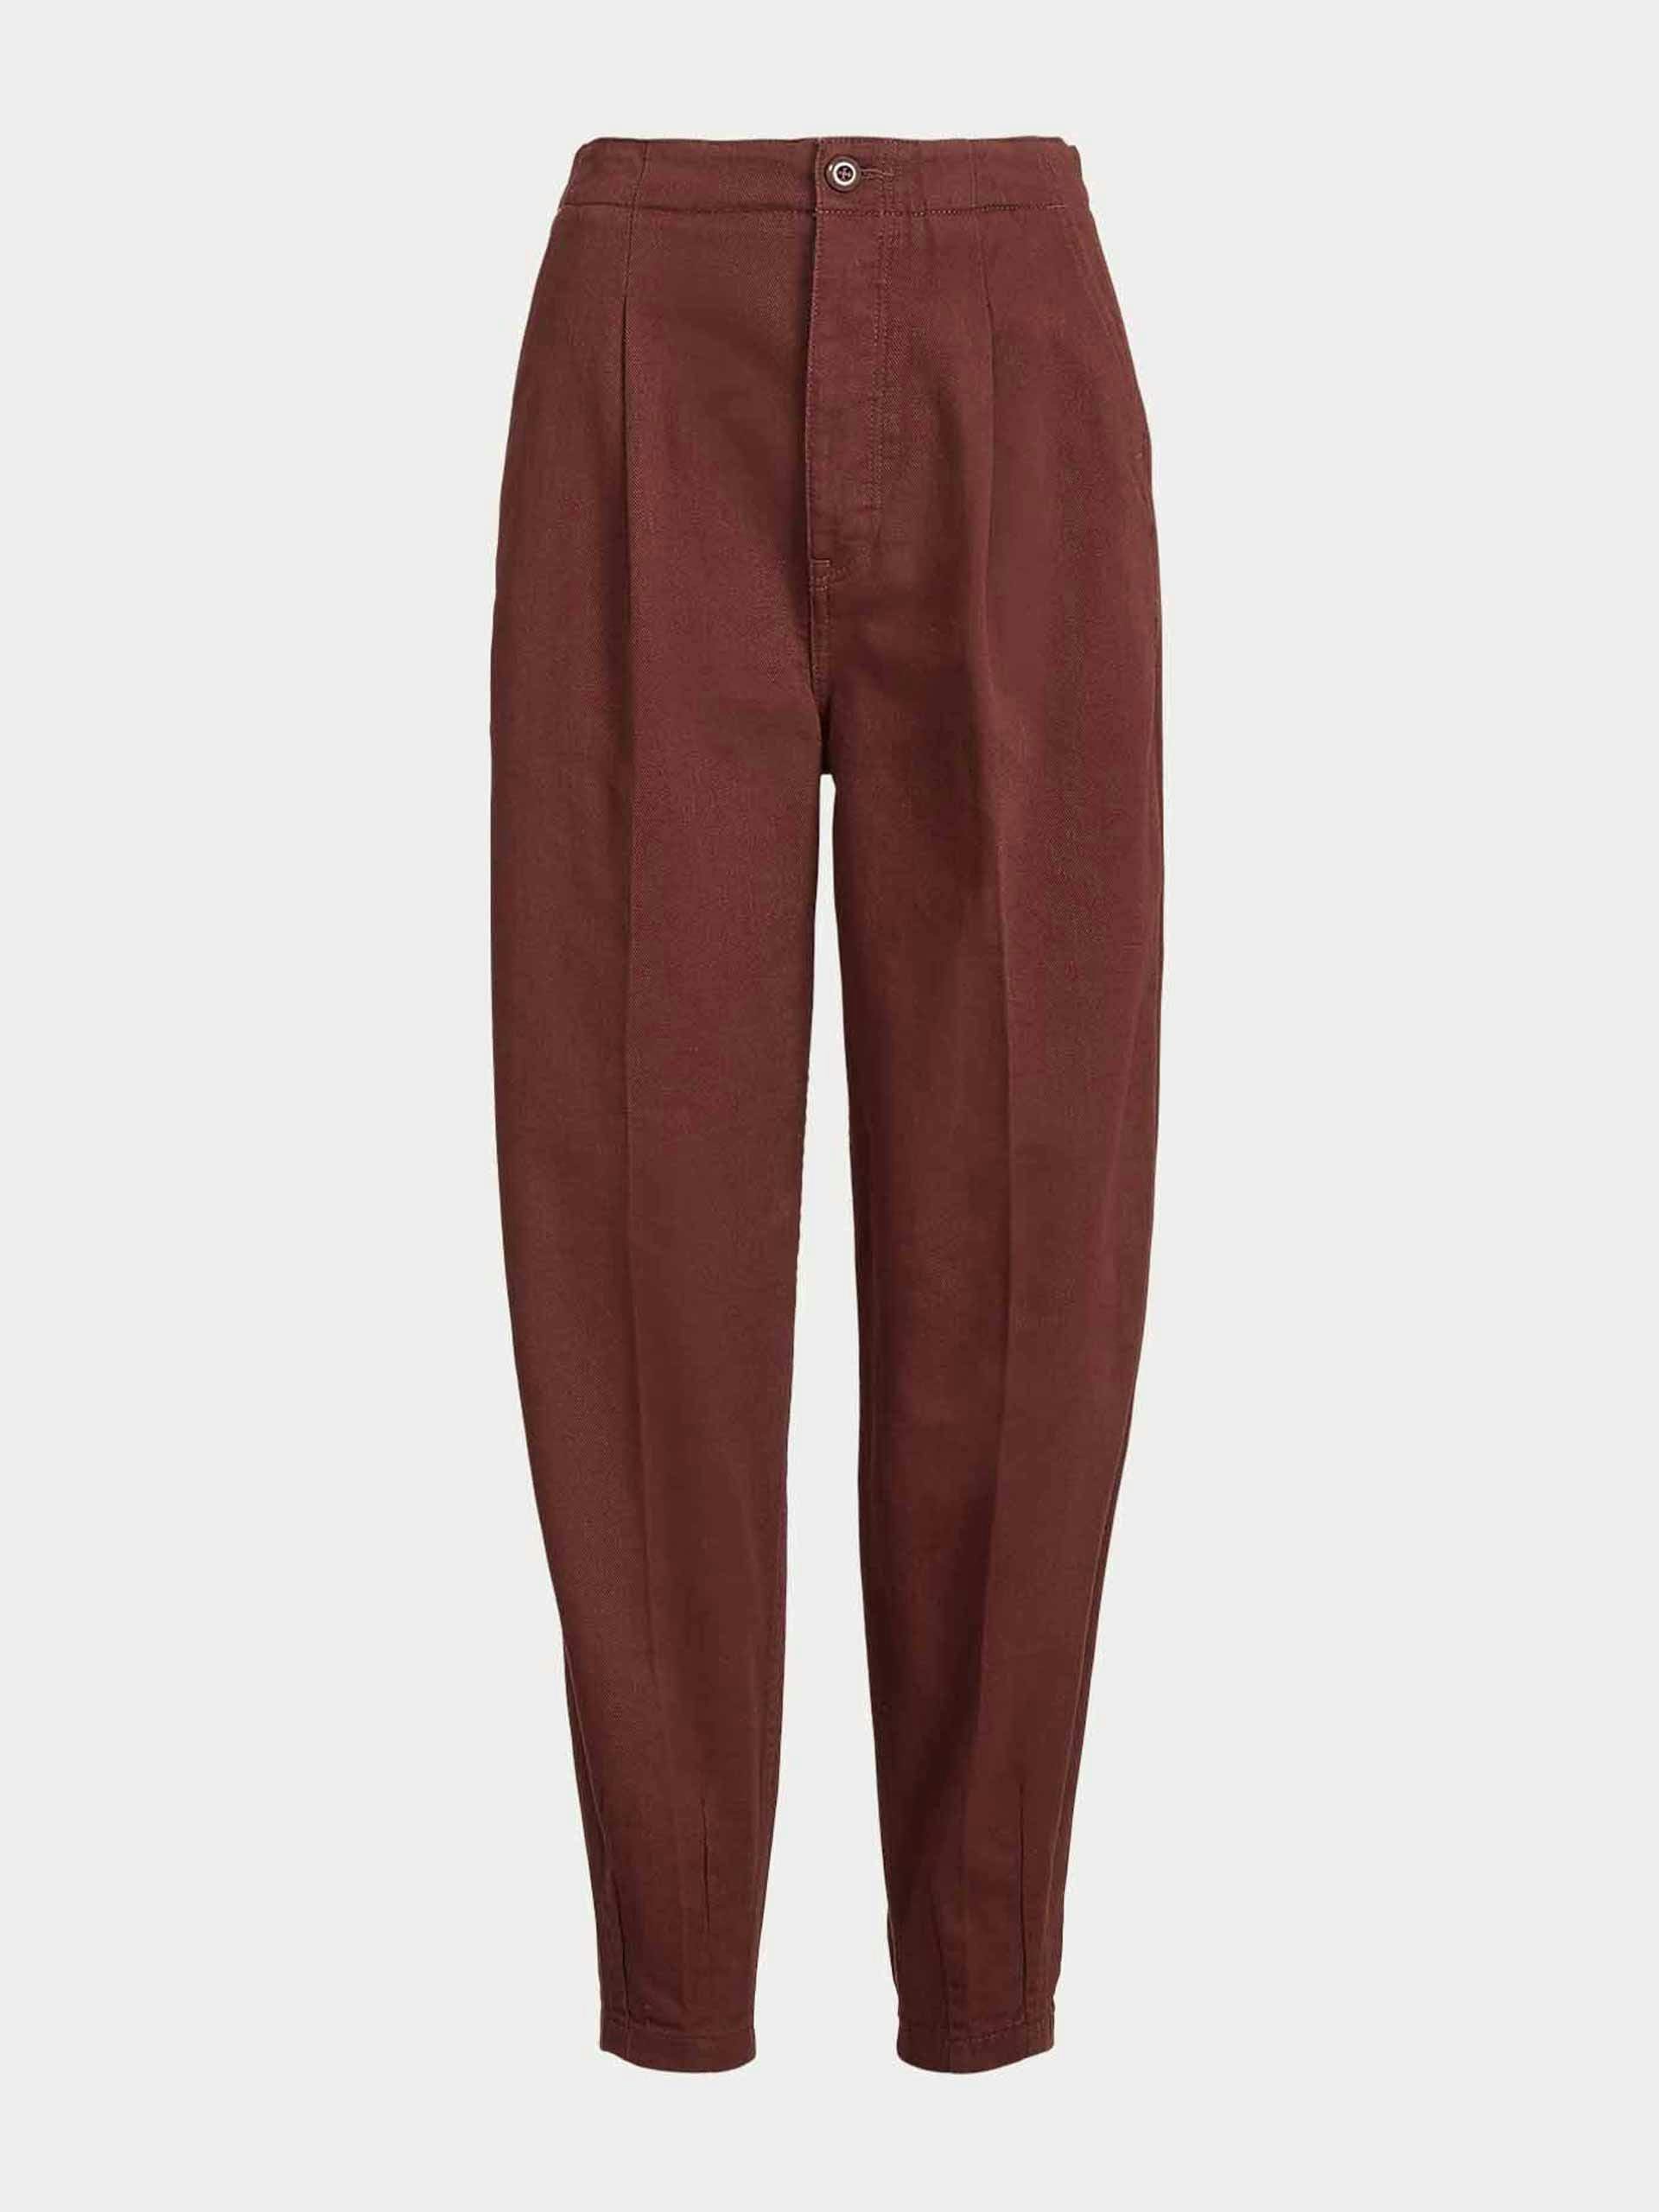 Pleated chino trousers